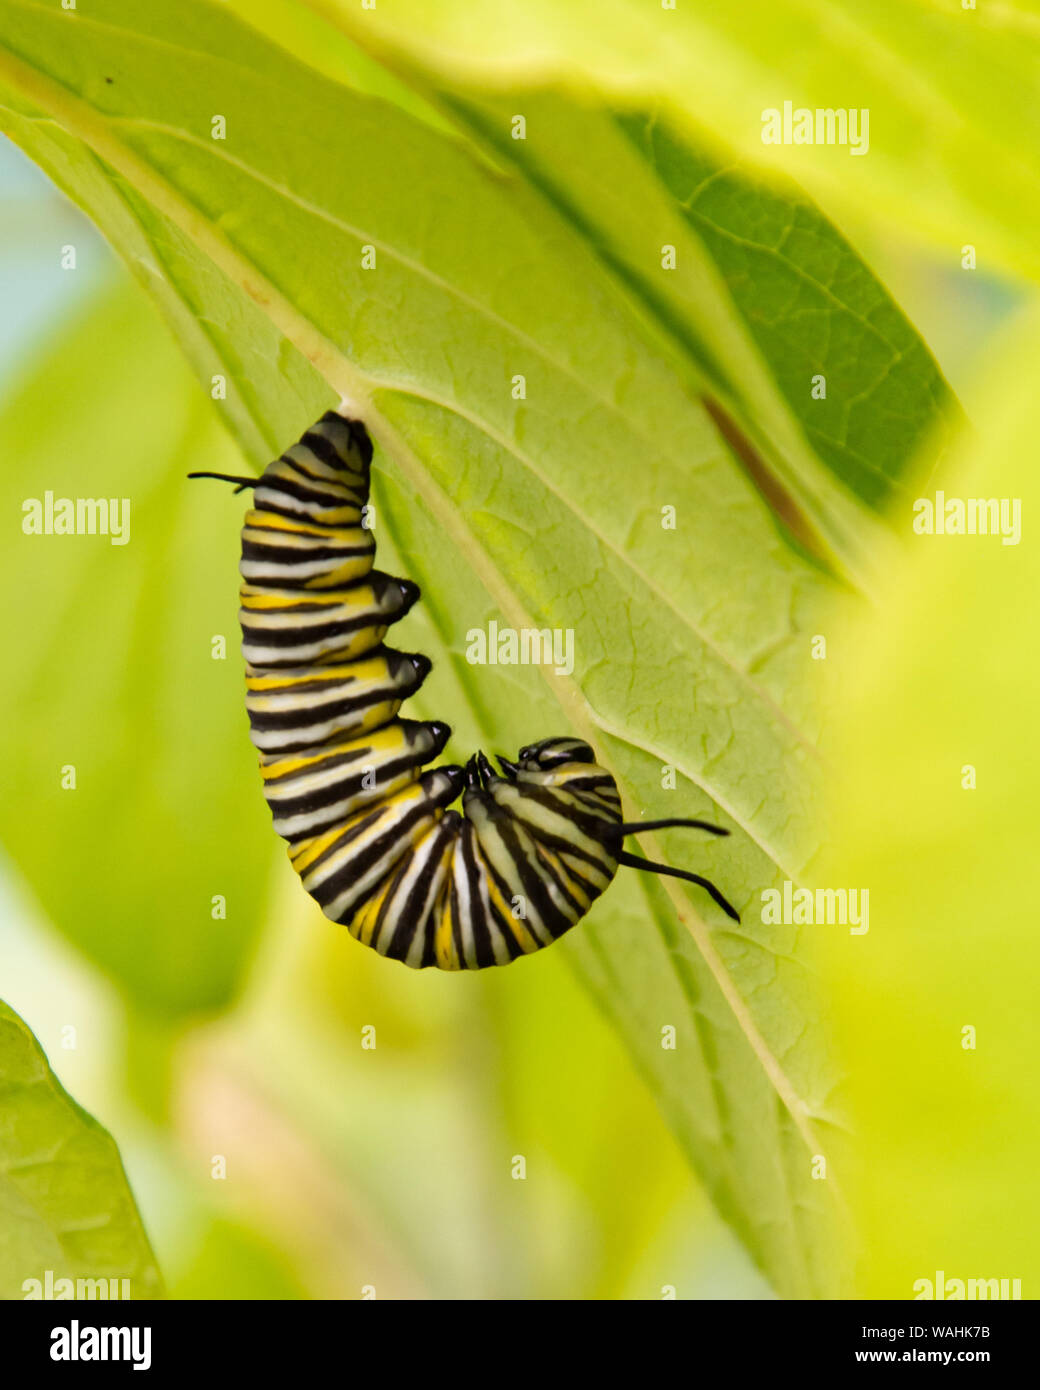 A Monarch butterfly caterpillar in the j form transforming into a chrysalis hanging from a leaf in a garden in Speculator, NY USA Stock Photo